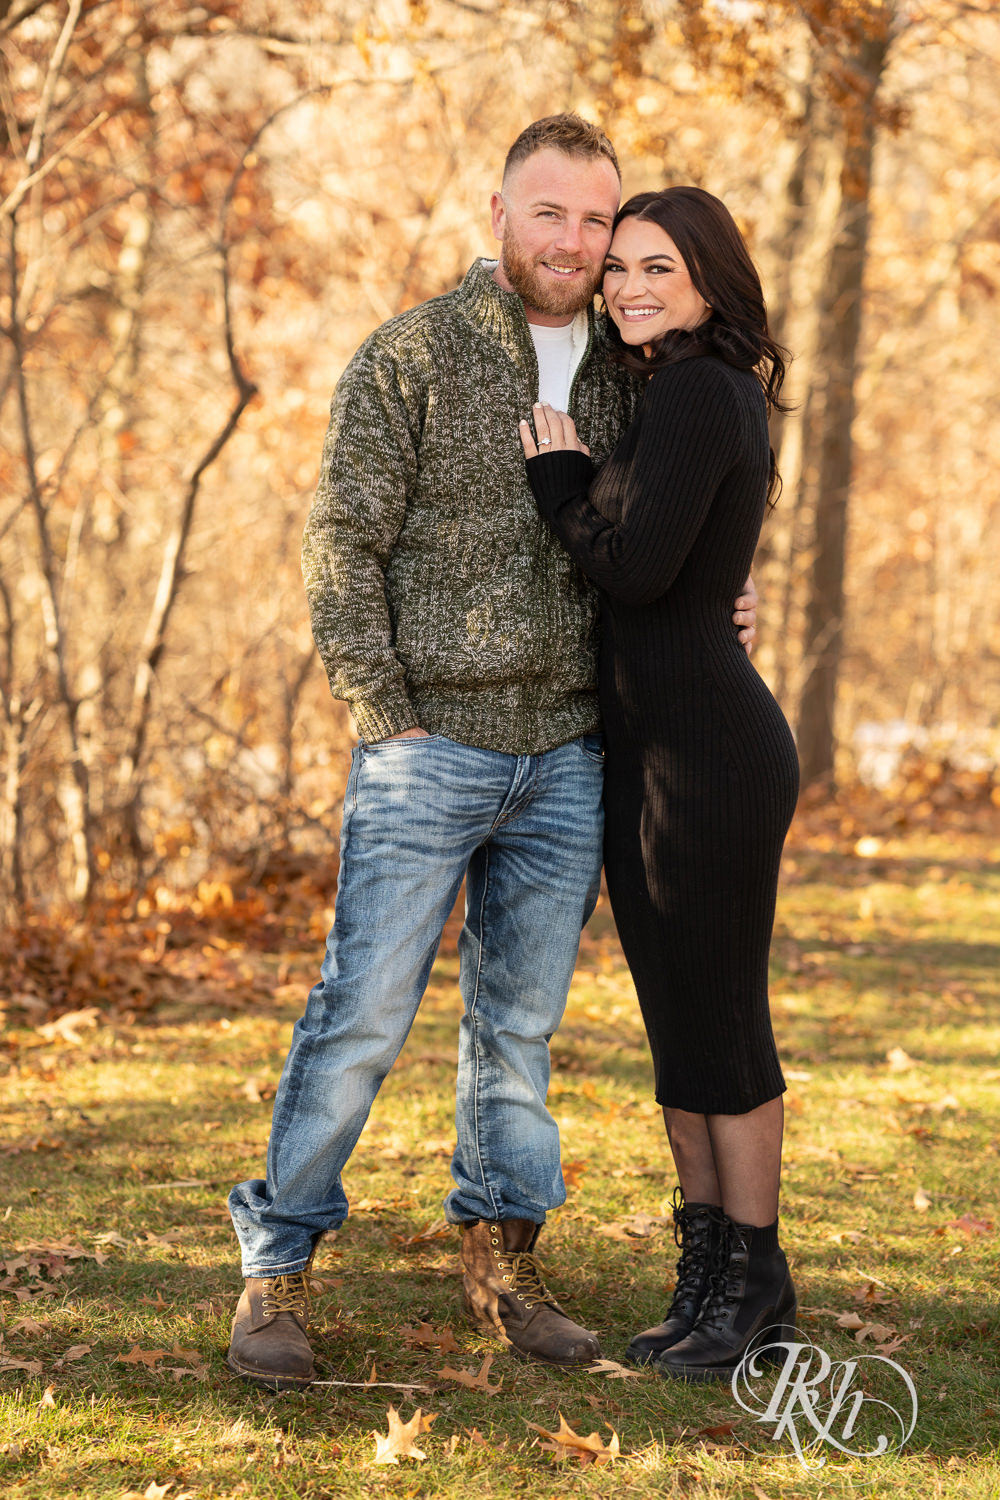 Man in sweater and jeans and woman in black dress smile at Lebanon Hills Regional Park in Eagan, Minnesota for December morning engagement photography.